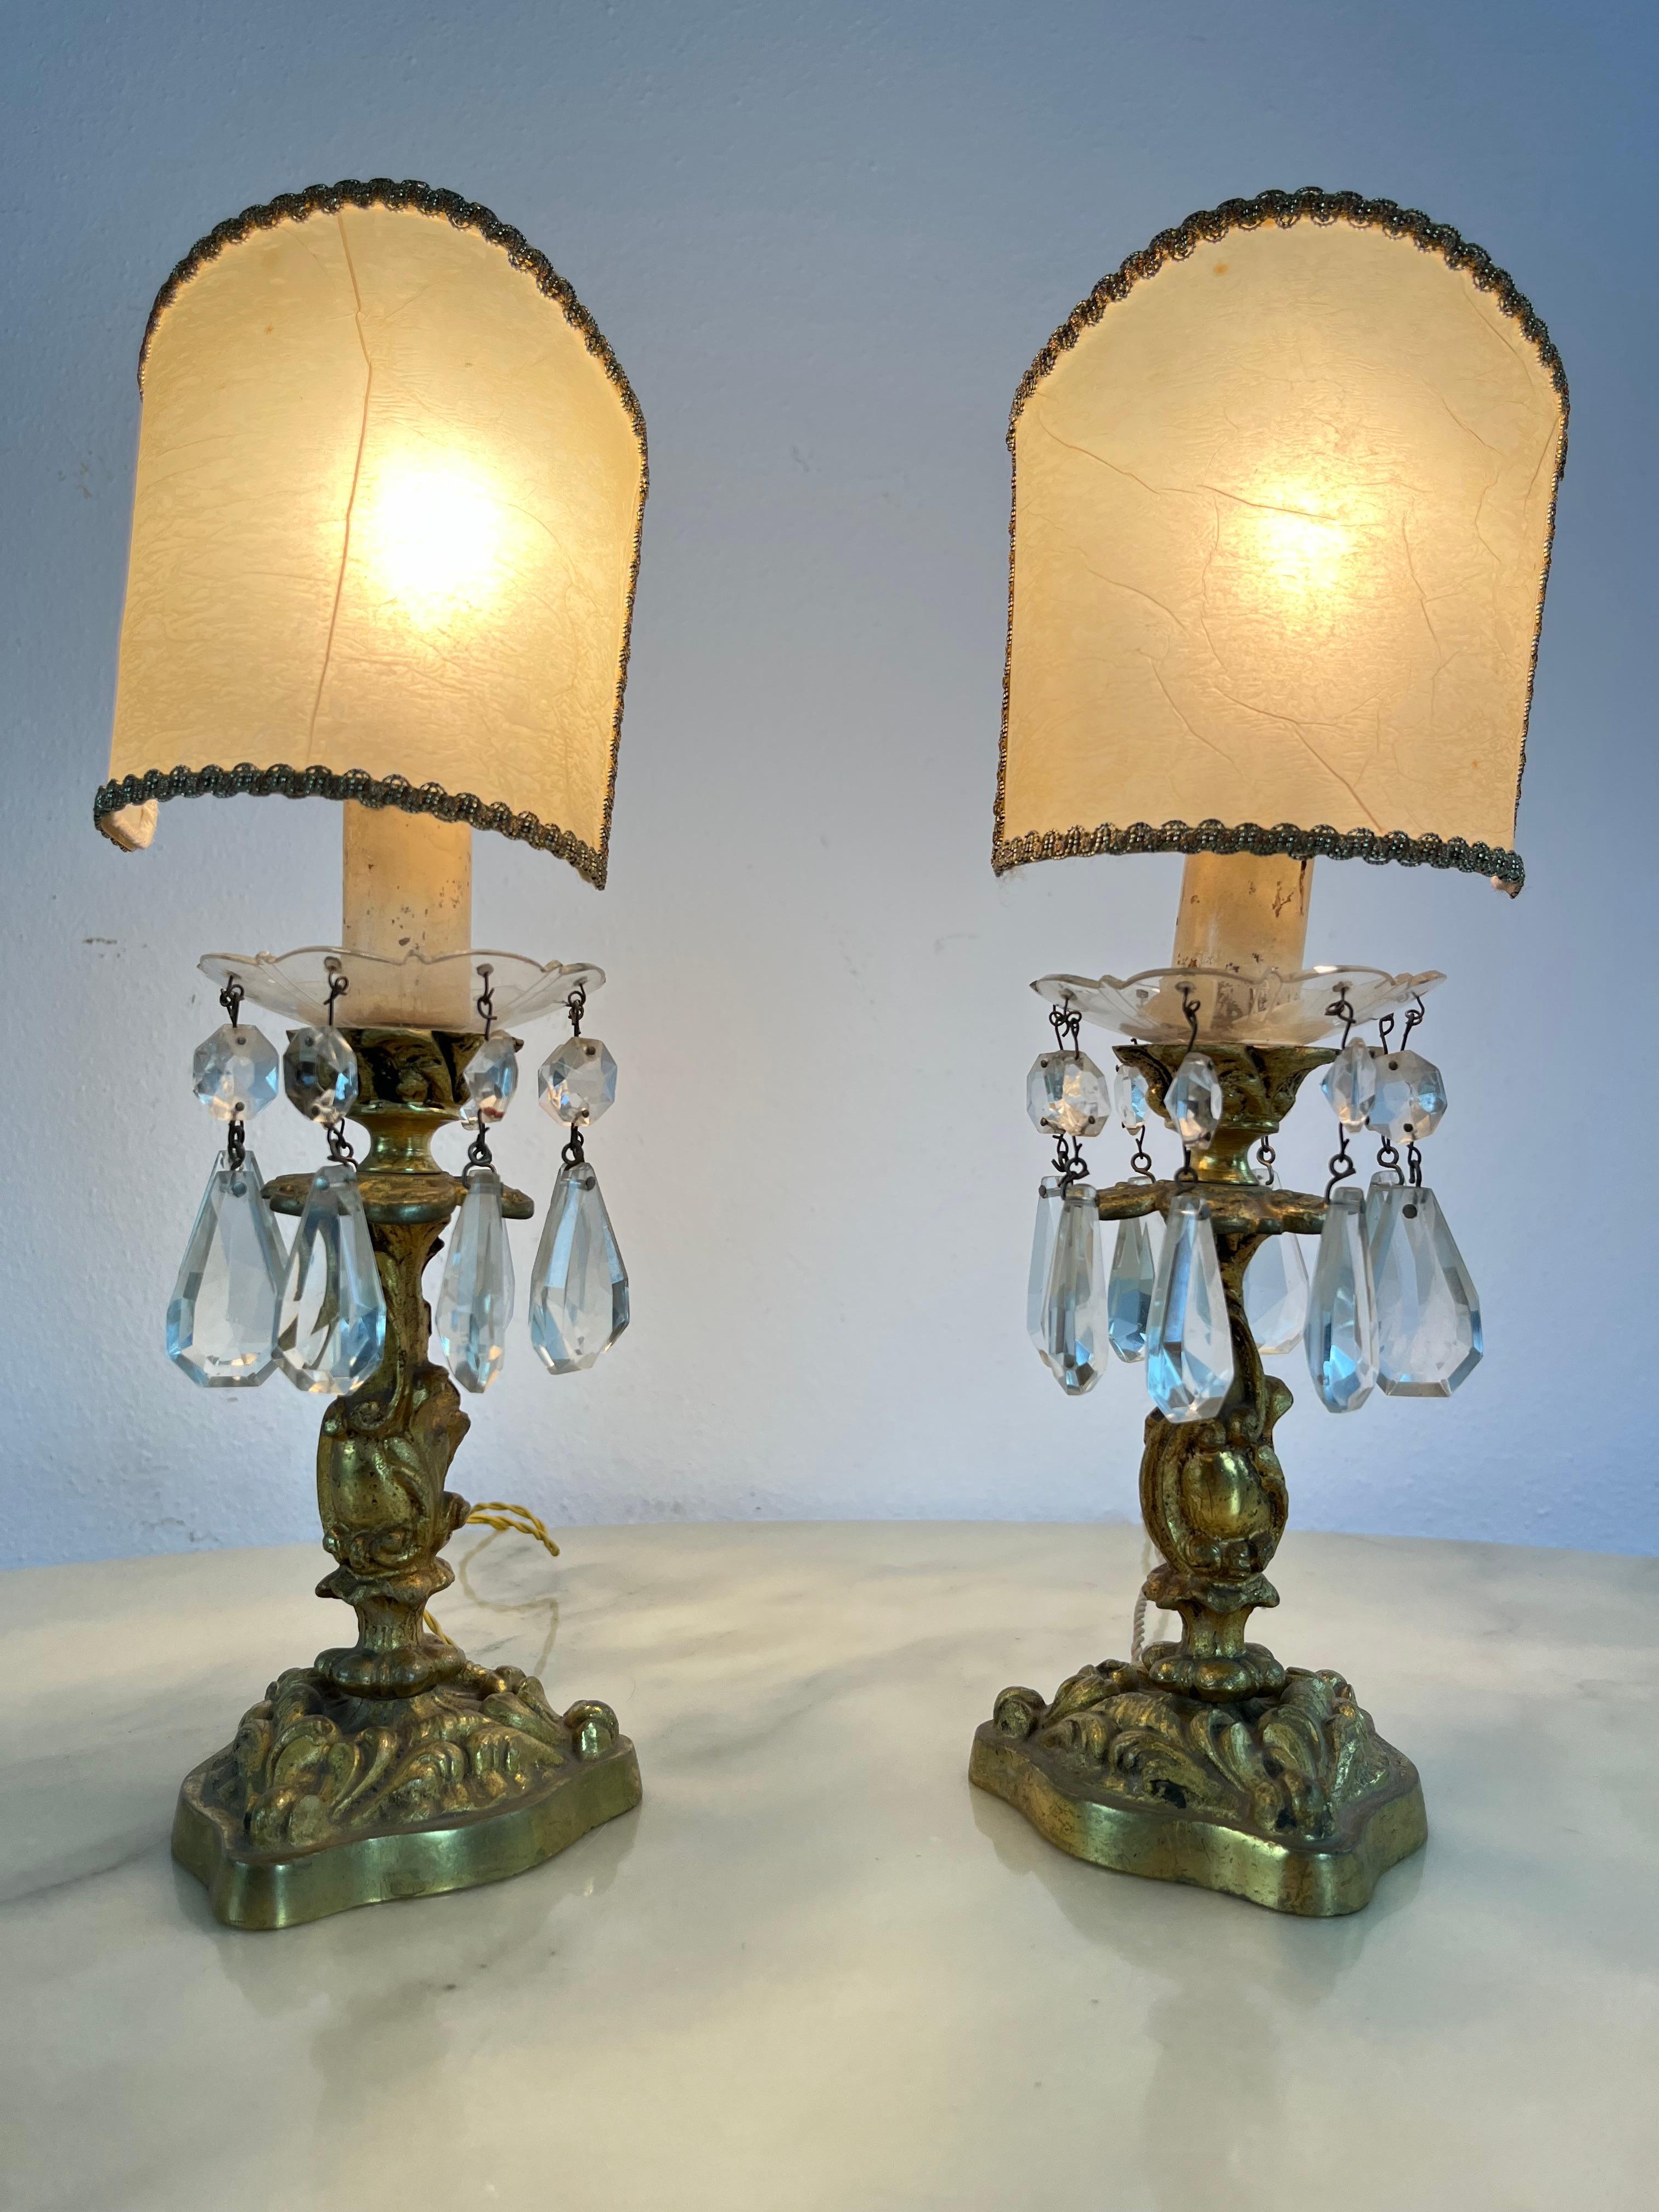 Set of 2 Mid-Century Brass and Crystal Bedside Lamps Attributed to Maison Bagués.
1950s, France.
Intact and functional, good condition with small signs of aging. E14 lamp.

Maison Baguès is a French design house that specializes in luxury lighting,